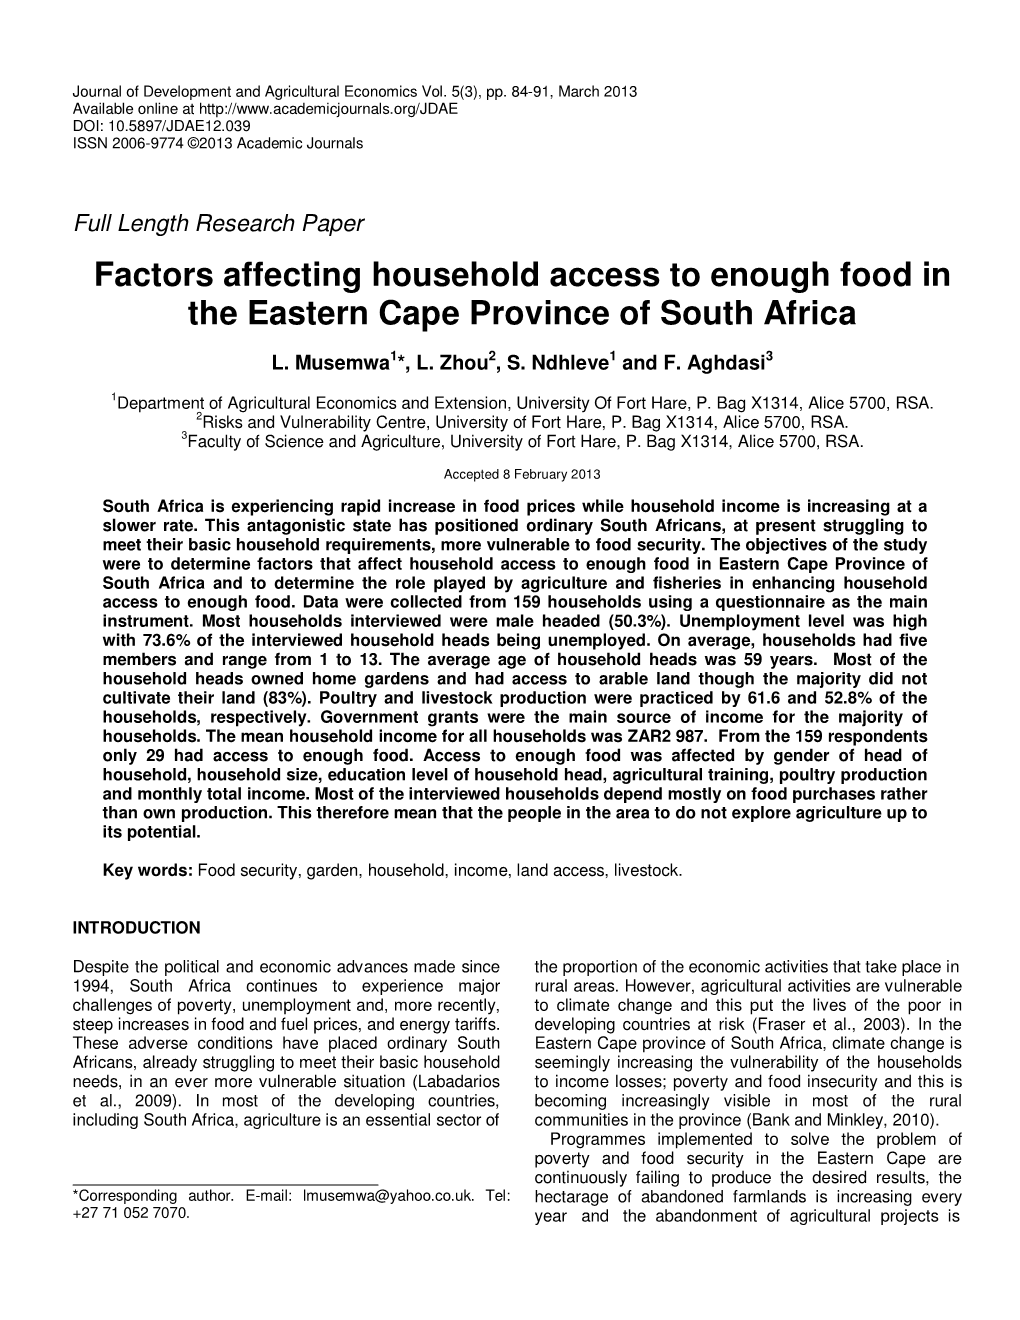 Factors Affecting Household Access to Enough Food in the Eastern Cape Province of South Africa